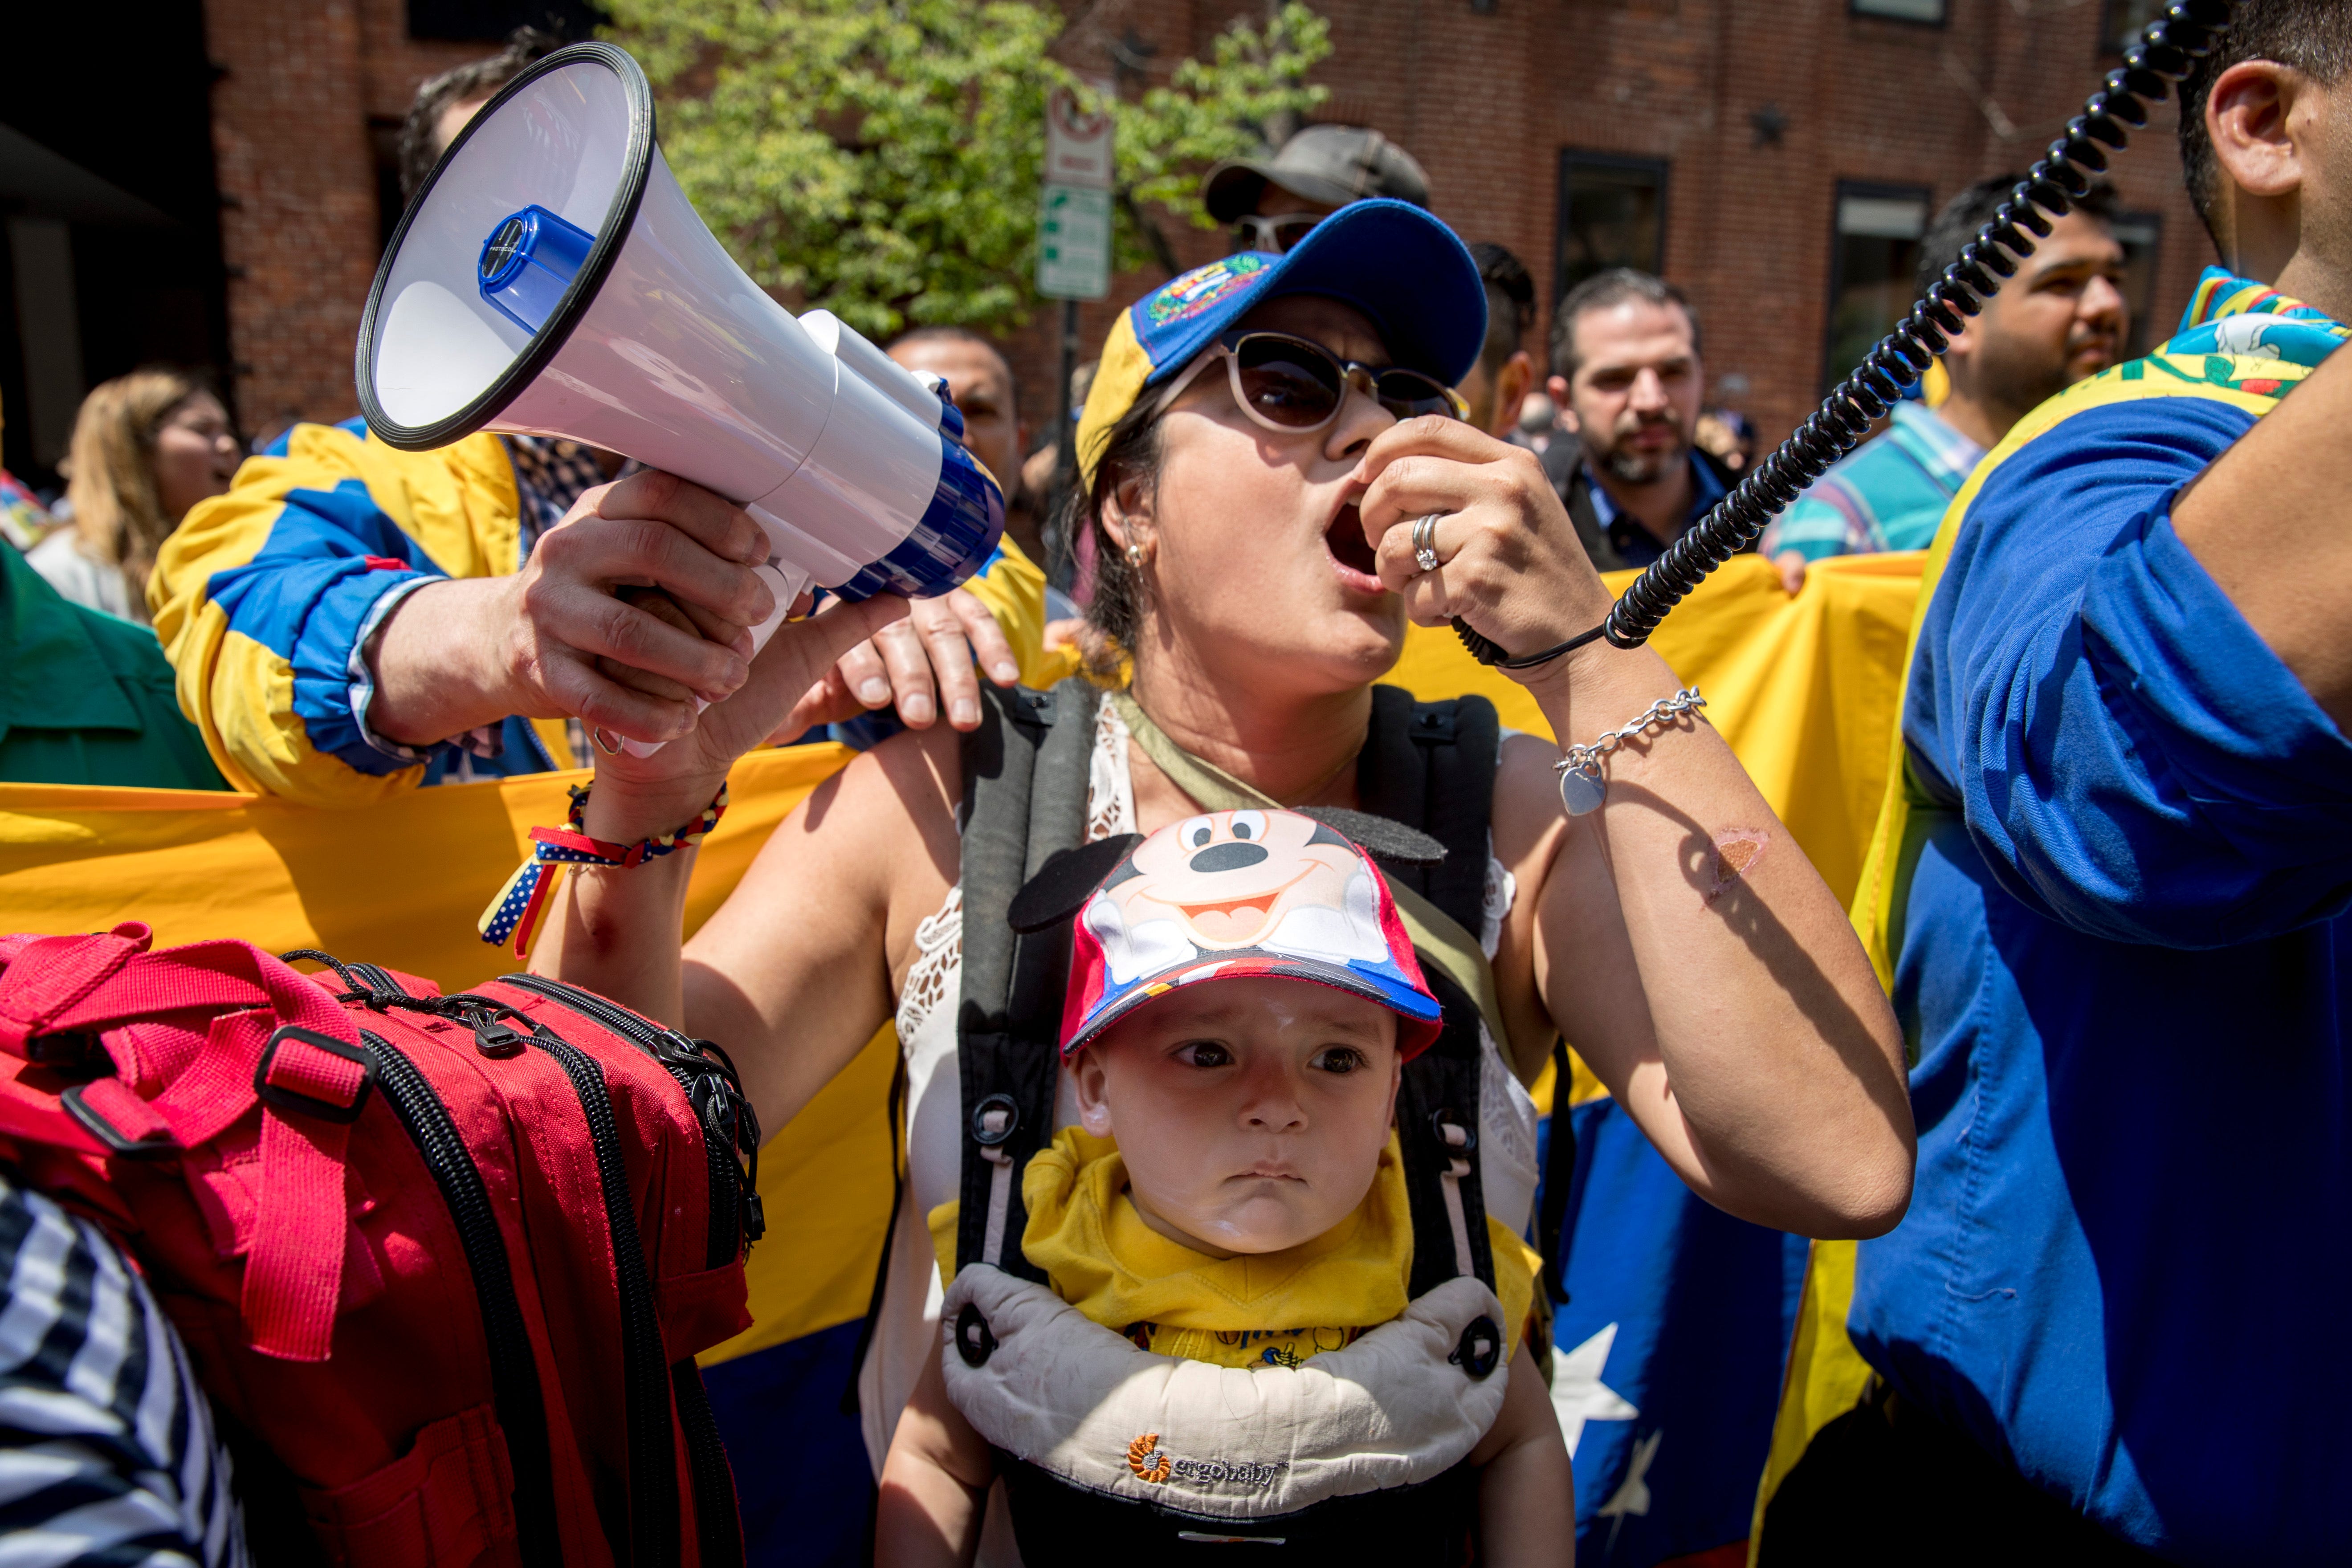 Carla Bustillos of Alexandria, Va., carries her son Carlos as she speaks on bullhorns with other supporters of pro interim government opposition leader Juan Guaido outside of the Venezuelan Embassy in Washington, April 30, 2019.